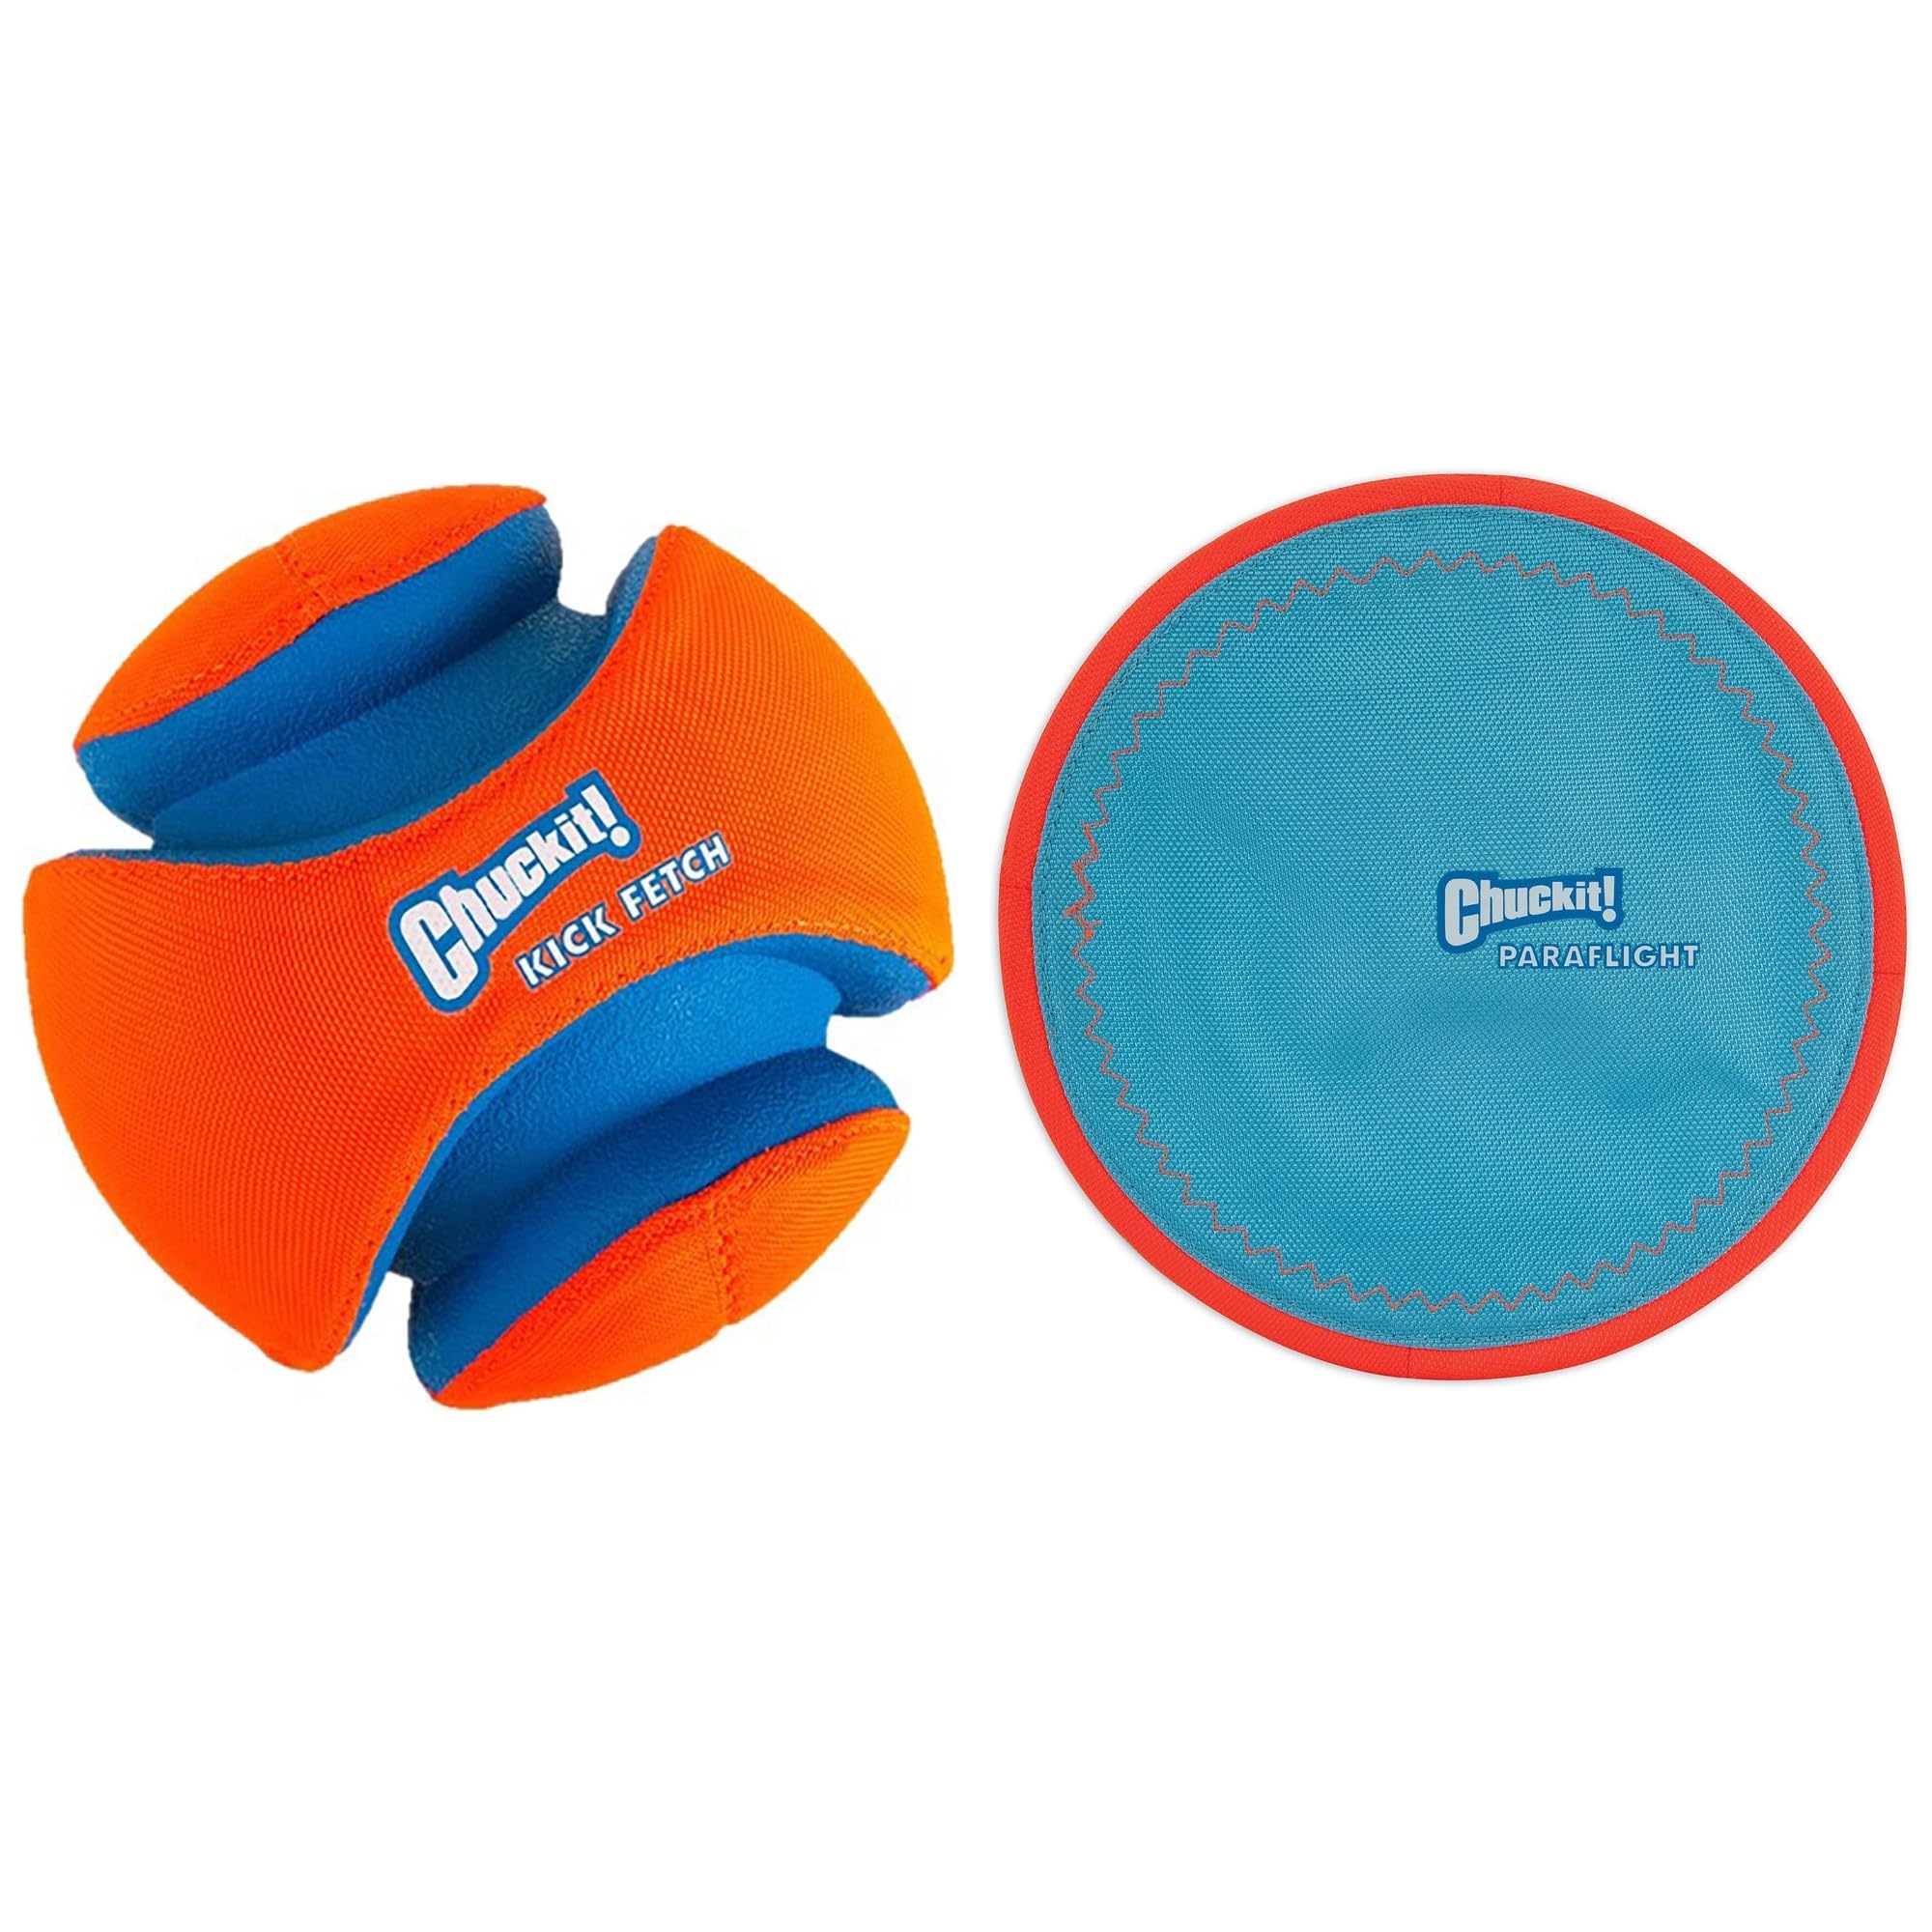 8" Chuckit! Kick Fetch Ball + 9.75" Chuckit! Paraflight Flying Disc Dog Toy (Large) $16.77 + Free Shipping w/ Prime or on $35+-